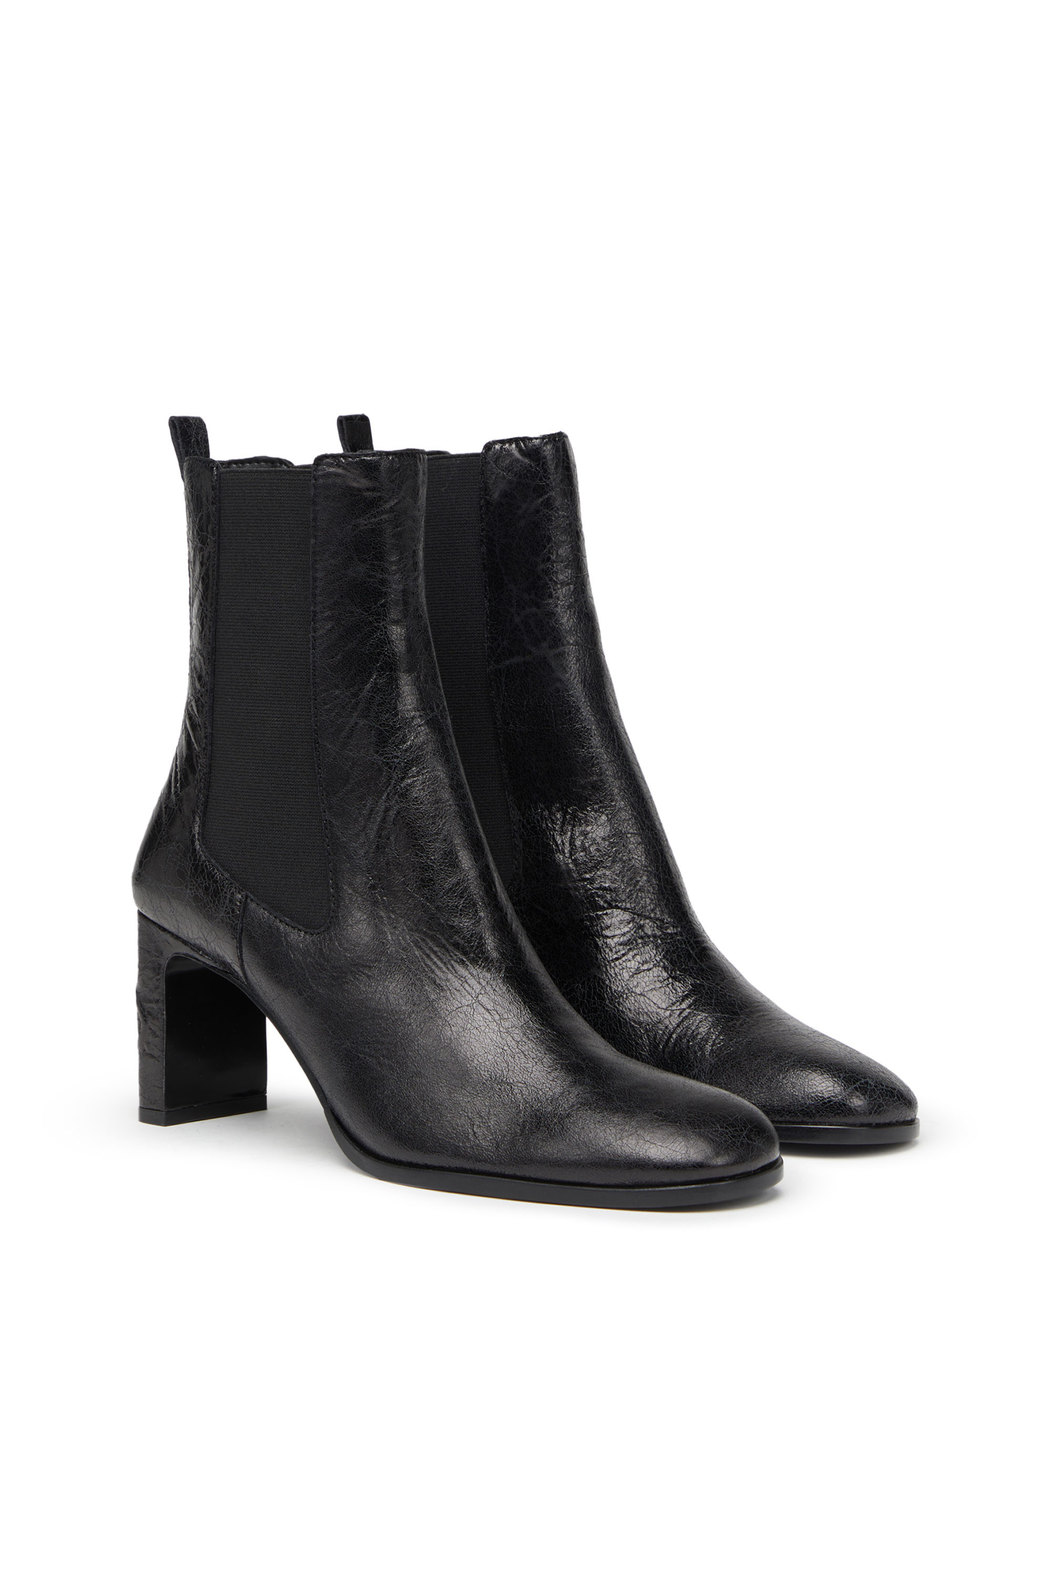 D-Giove AB - Heeled Chelsea boots in wrinkled leather